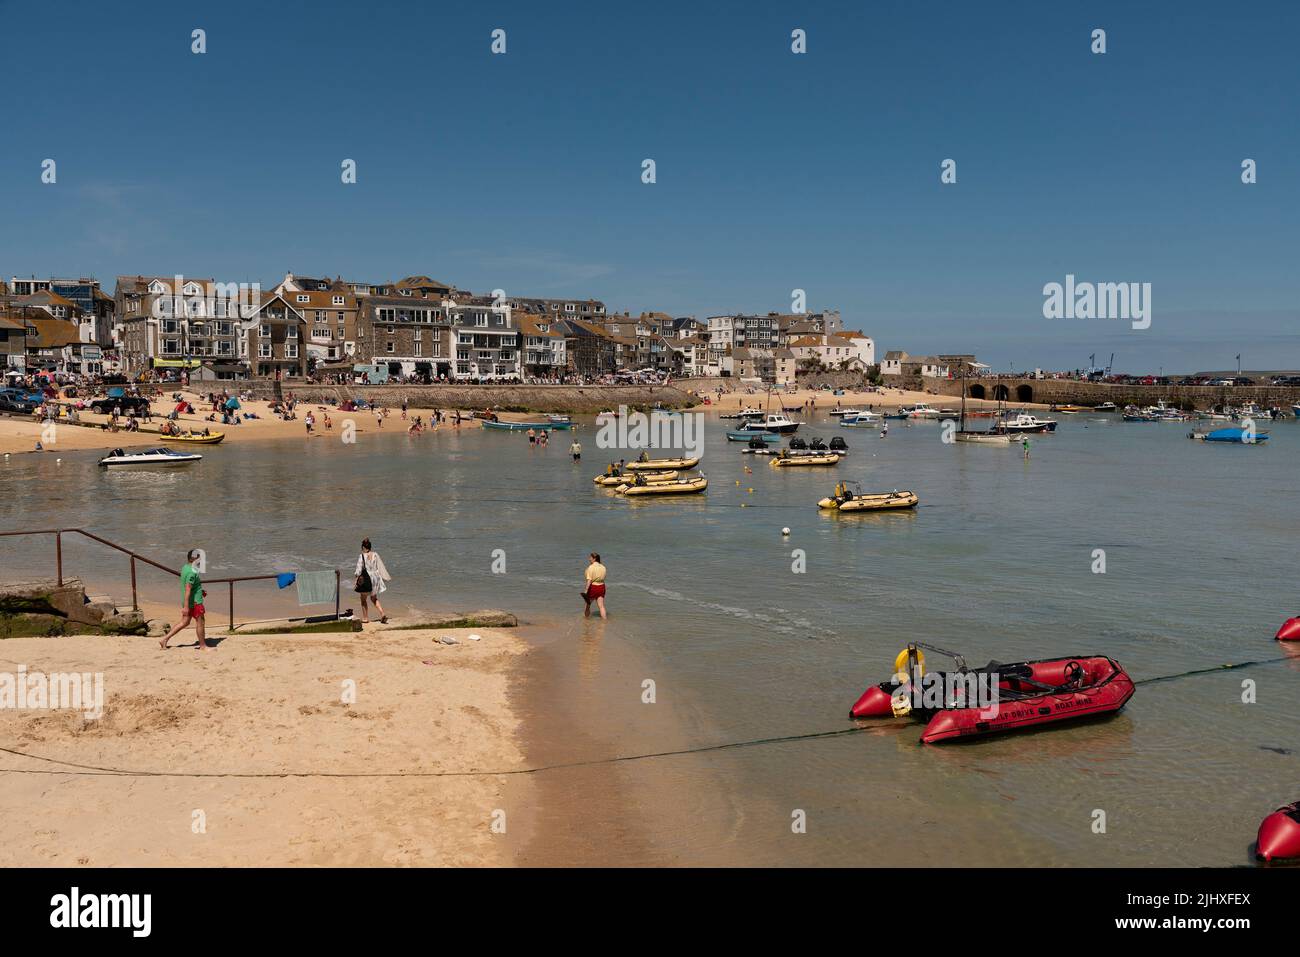 St Ives, Cornwall, England, UK. 2022. St Ives popular seaside resort in Cornwall. Small beaches surrond the waterfront. Stock Photo